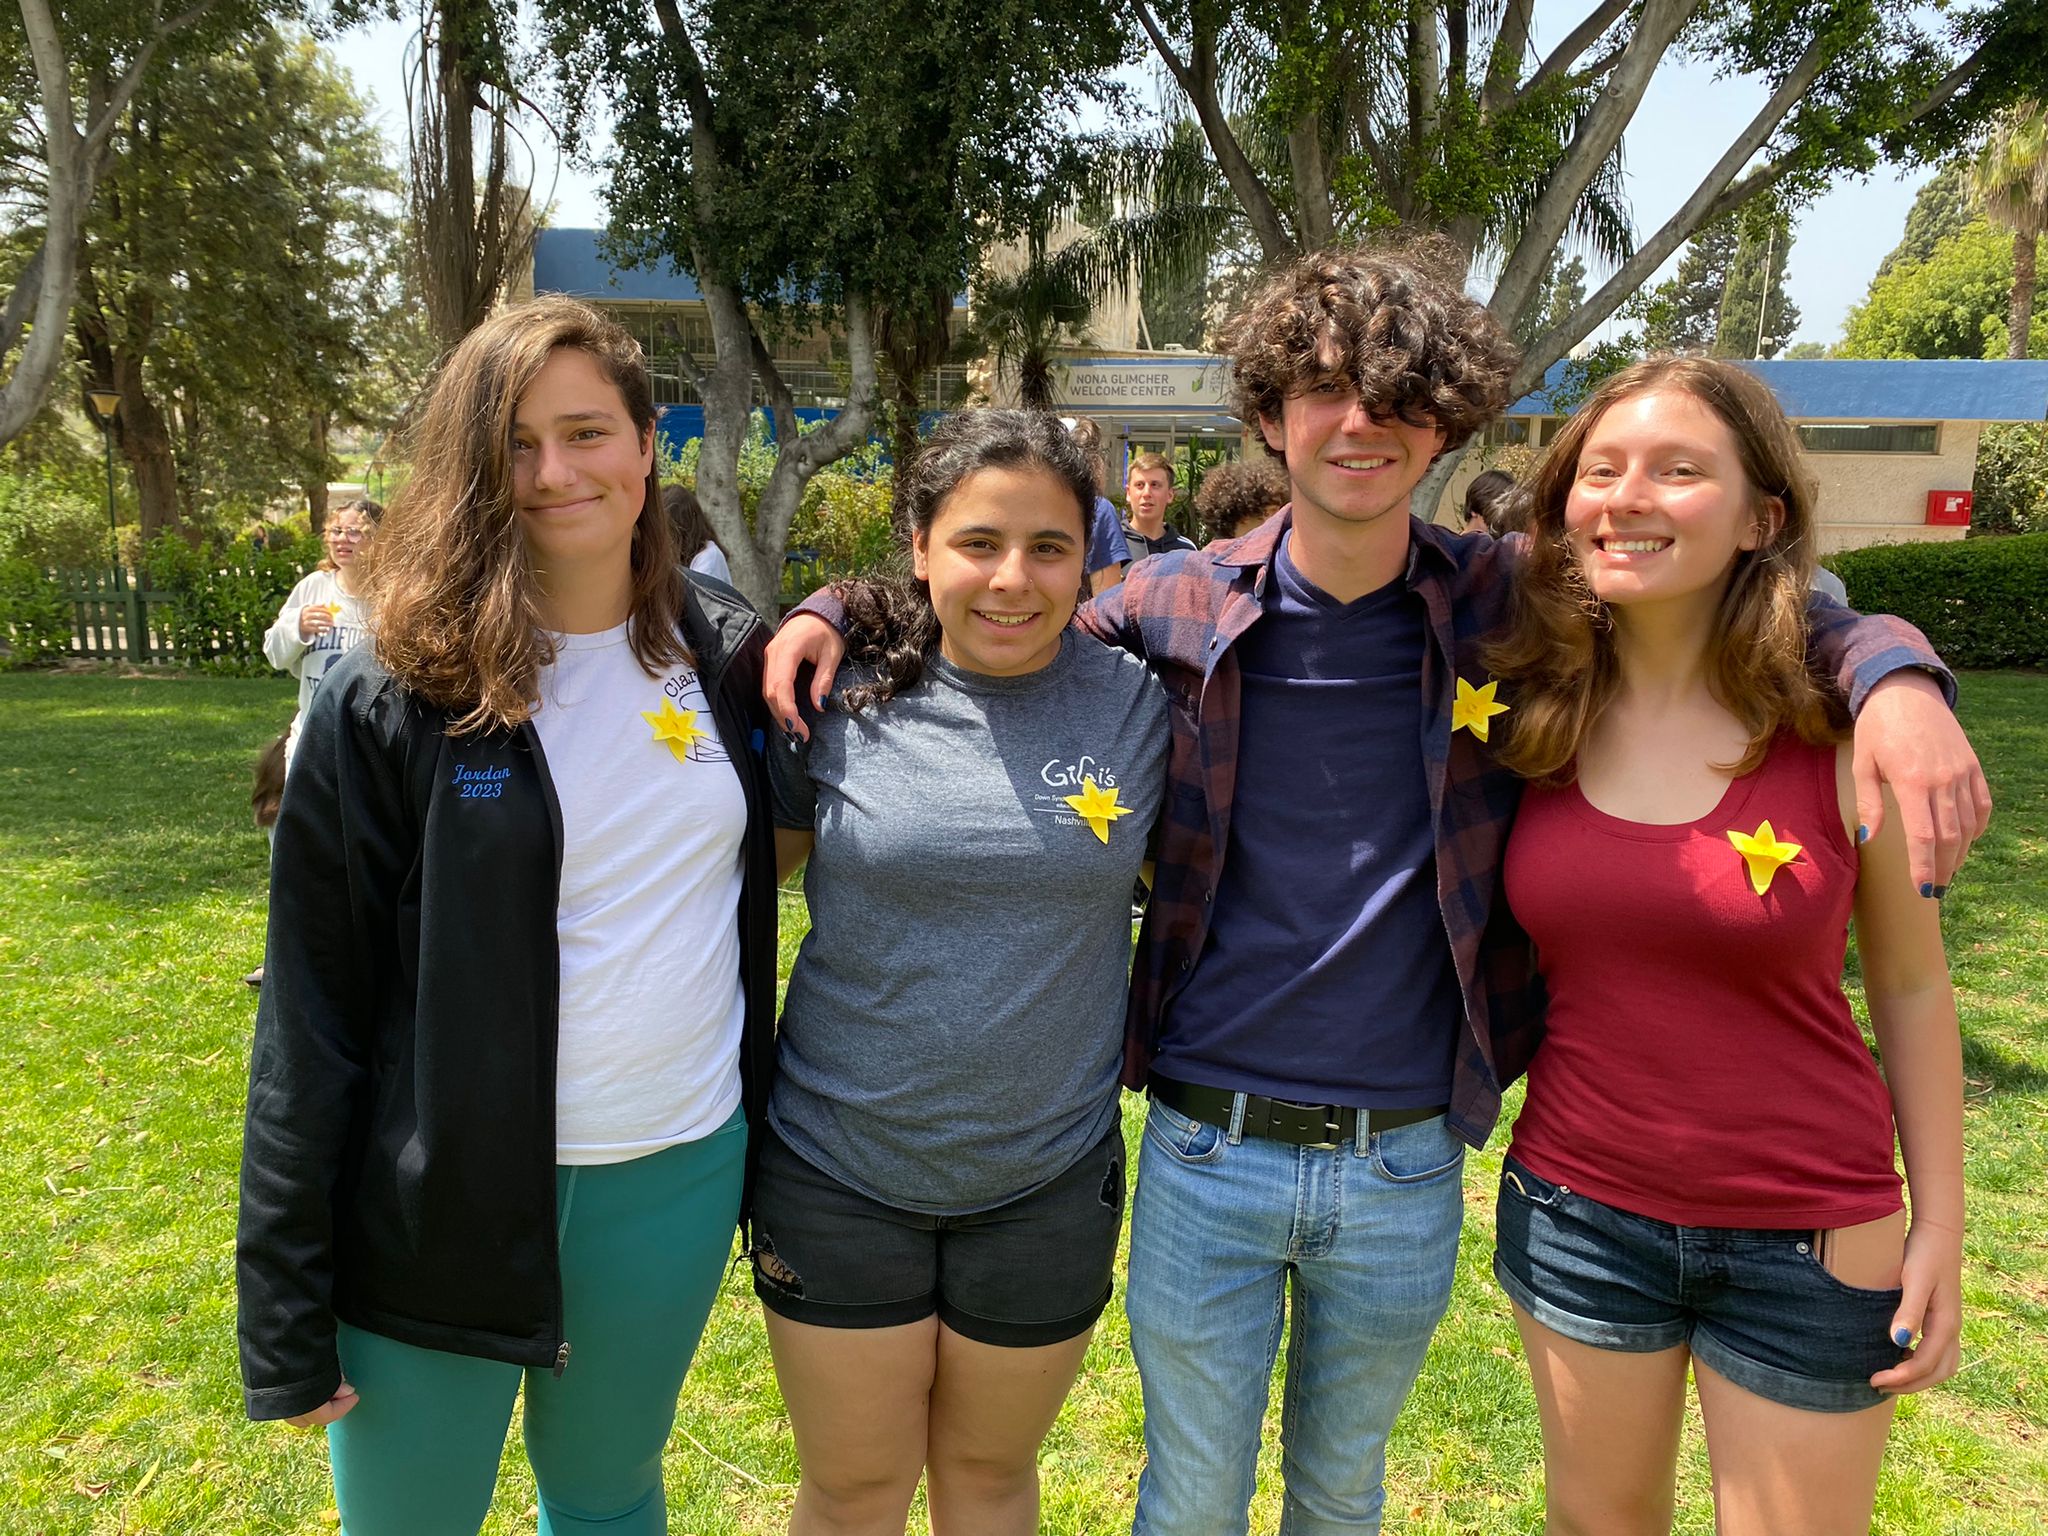 Sunny day in Israel. Three girls and one boy are standing next to each other. They are wearing paper daffodils on their clothes.